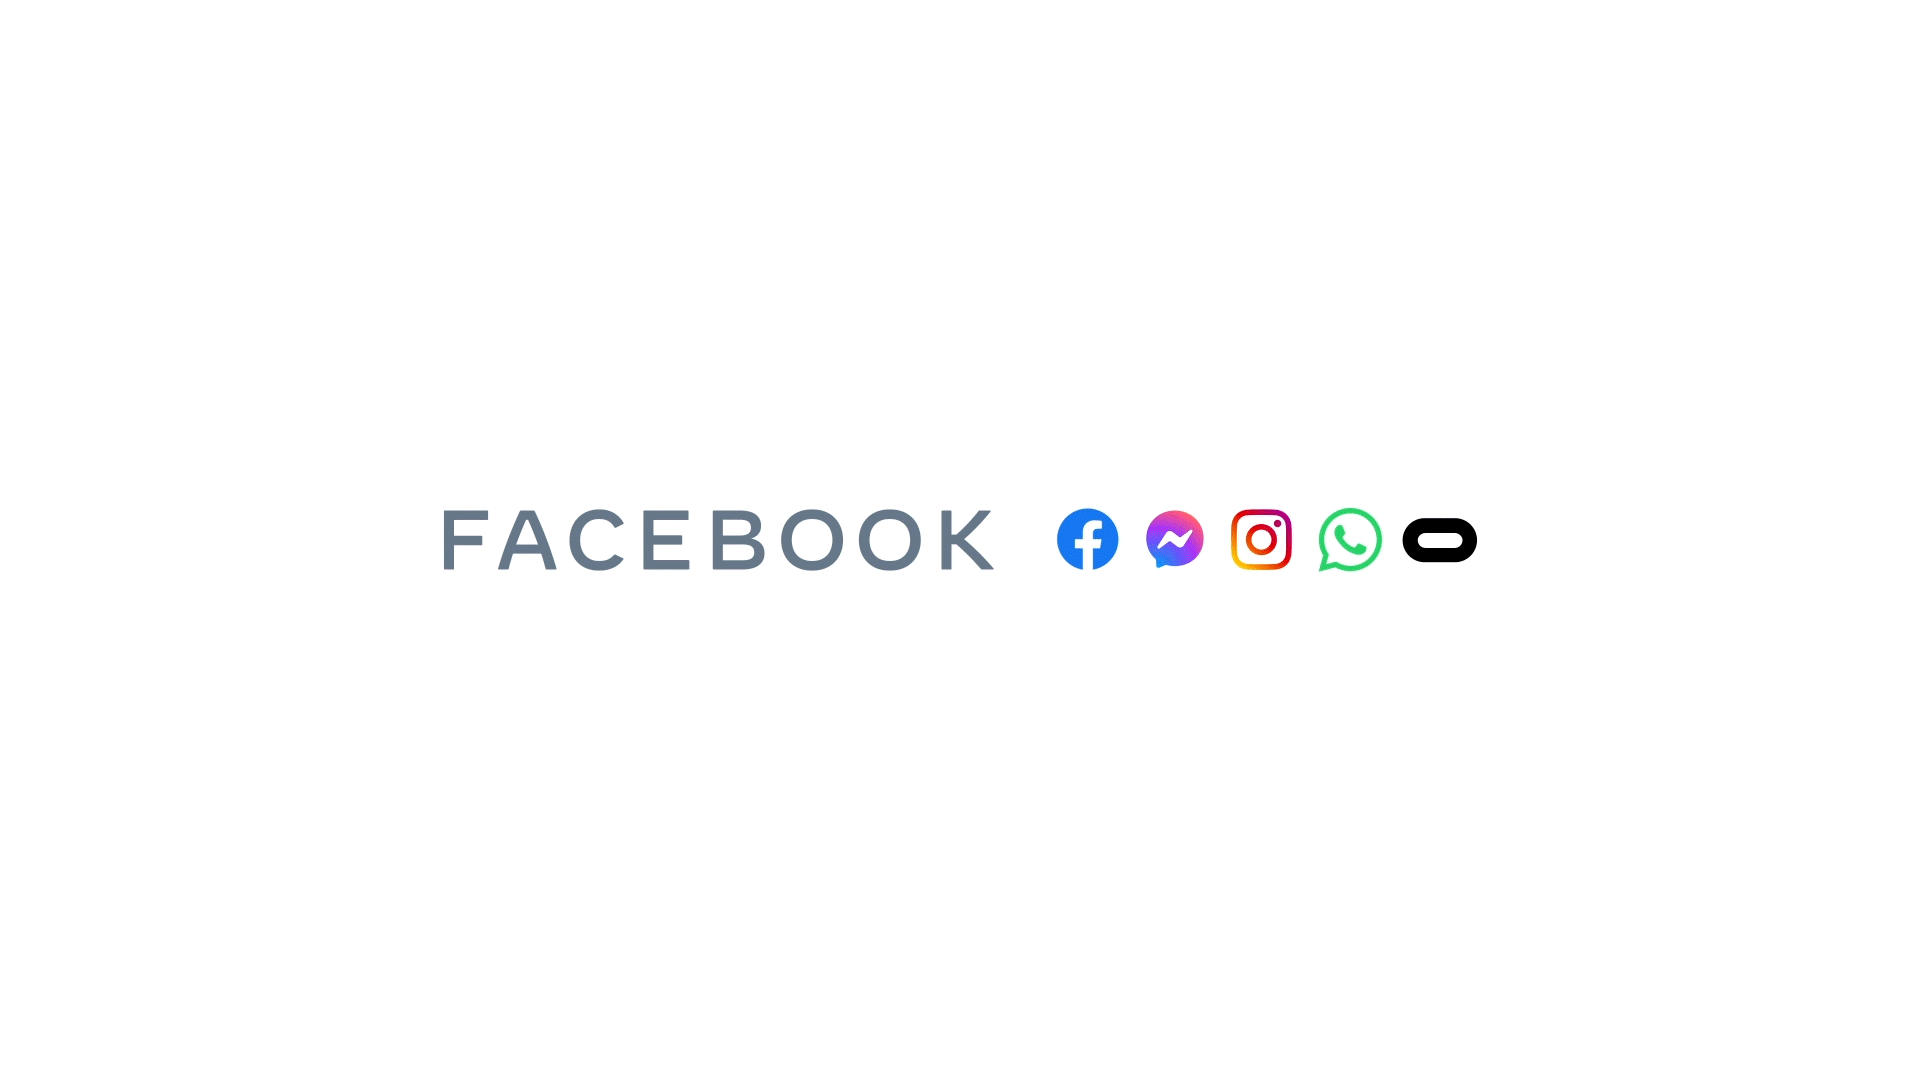 Facebook’s new company name and logo.